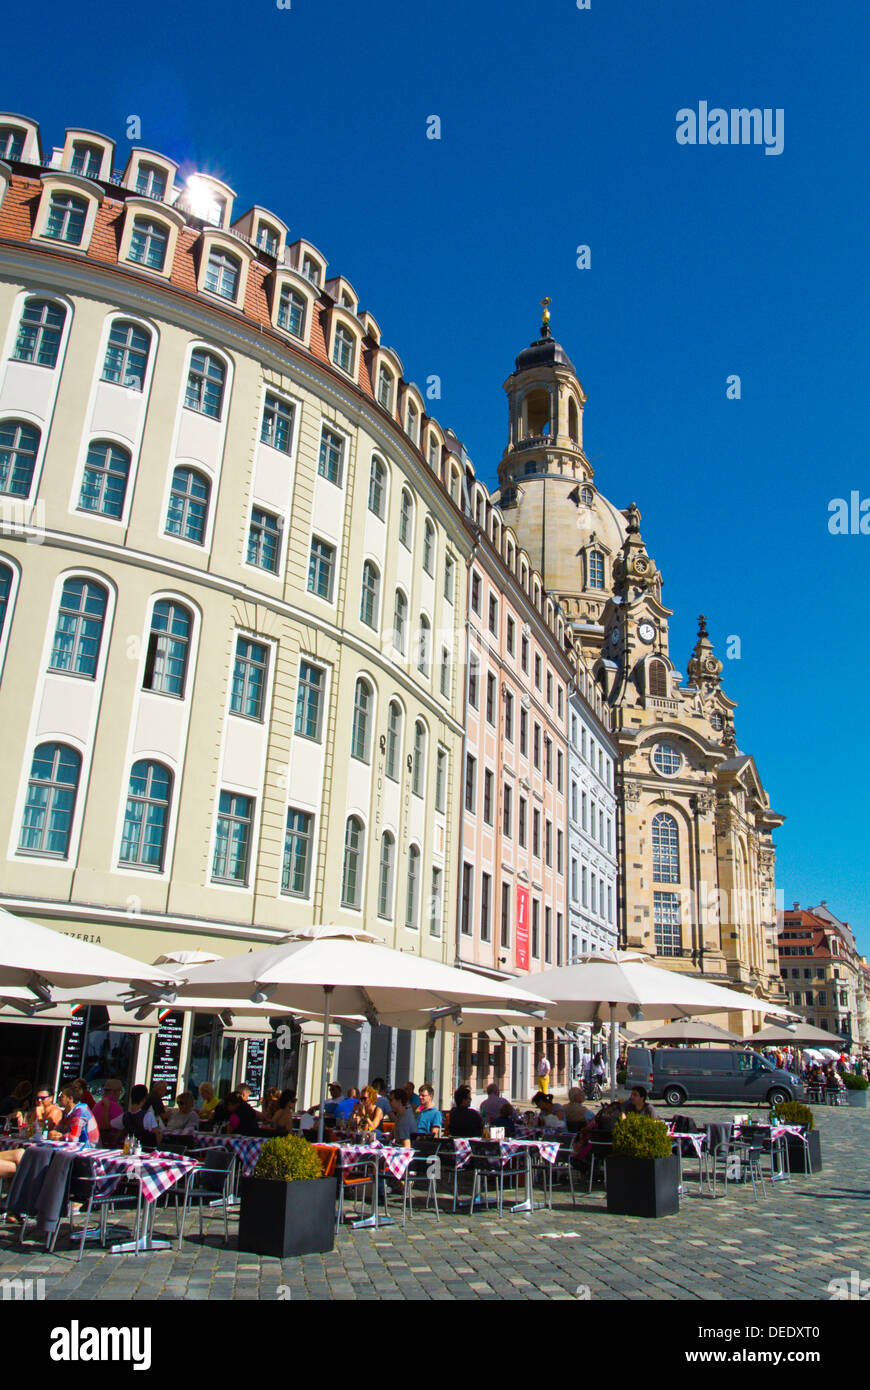 Cafe and restaurant terraces Neumarkt square Altstadt the old town Dresden city Germany central Europe Stock Photo